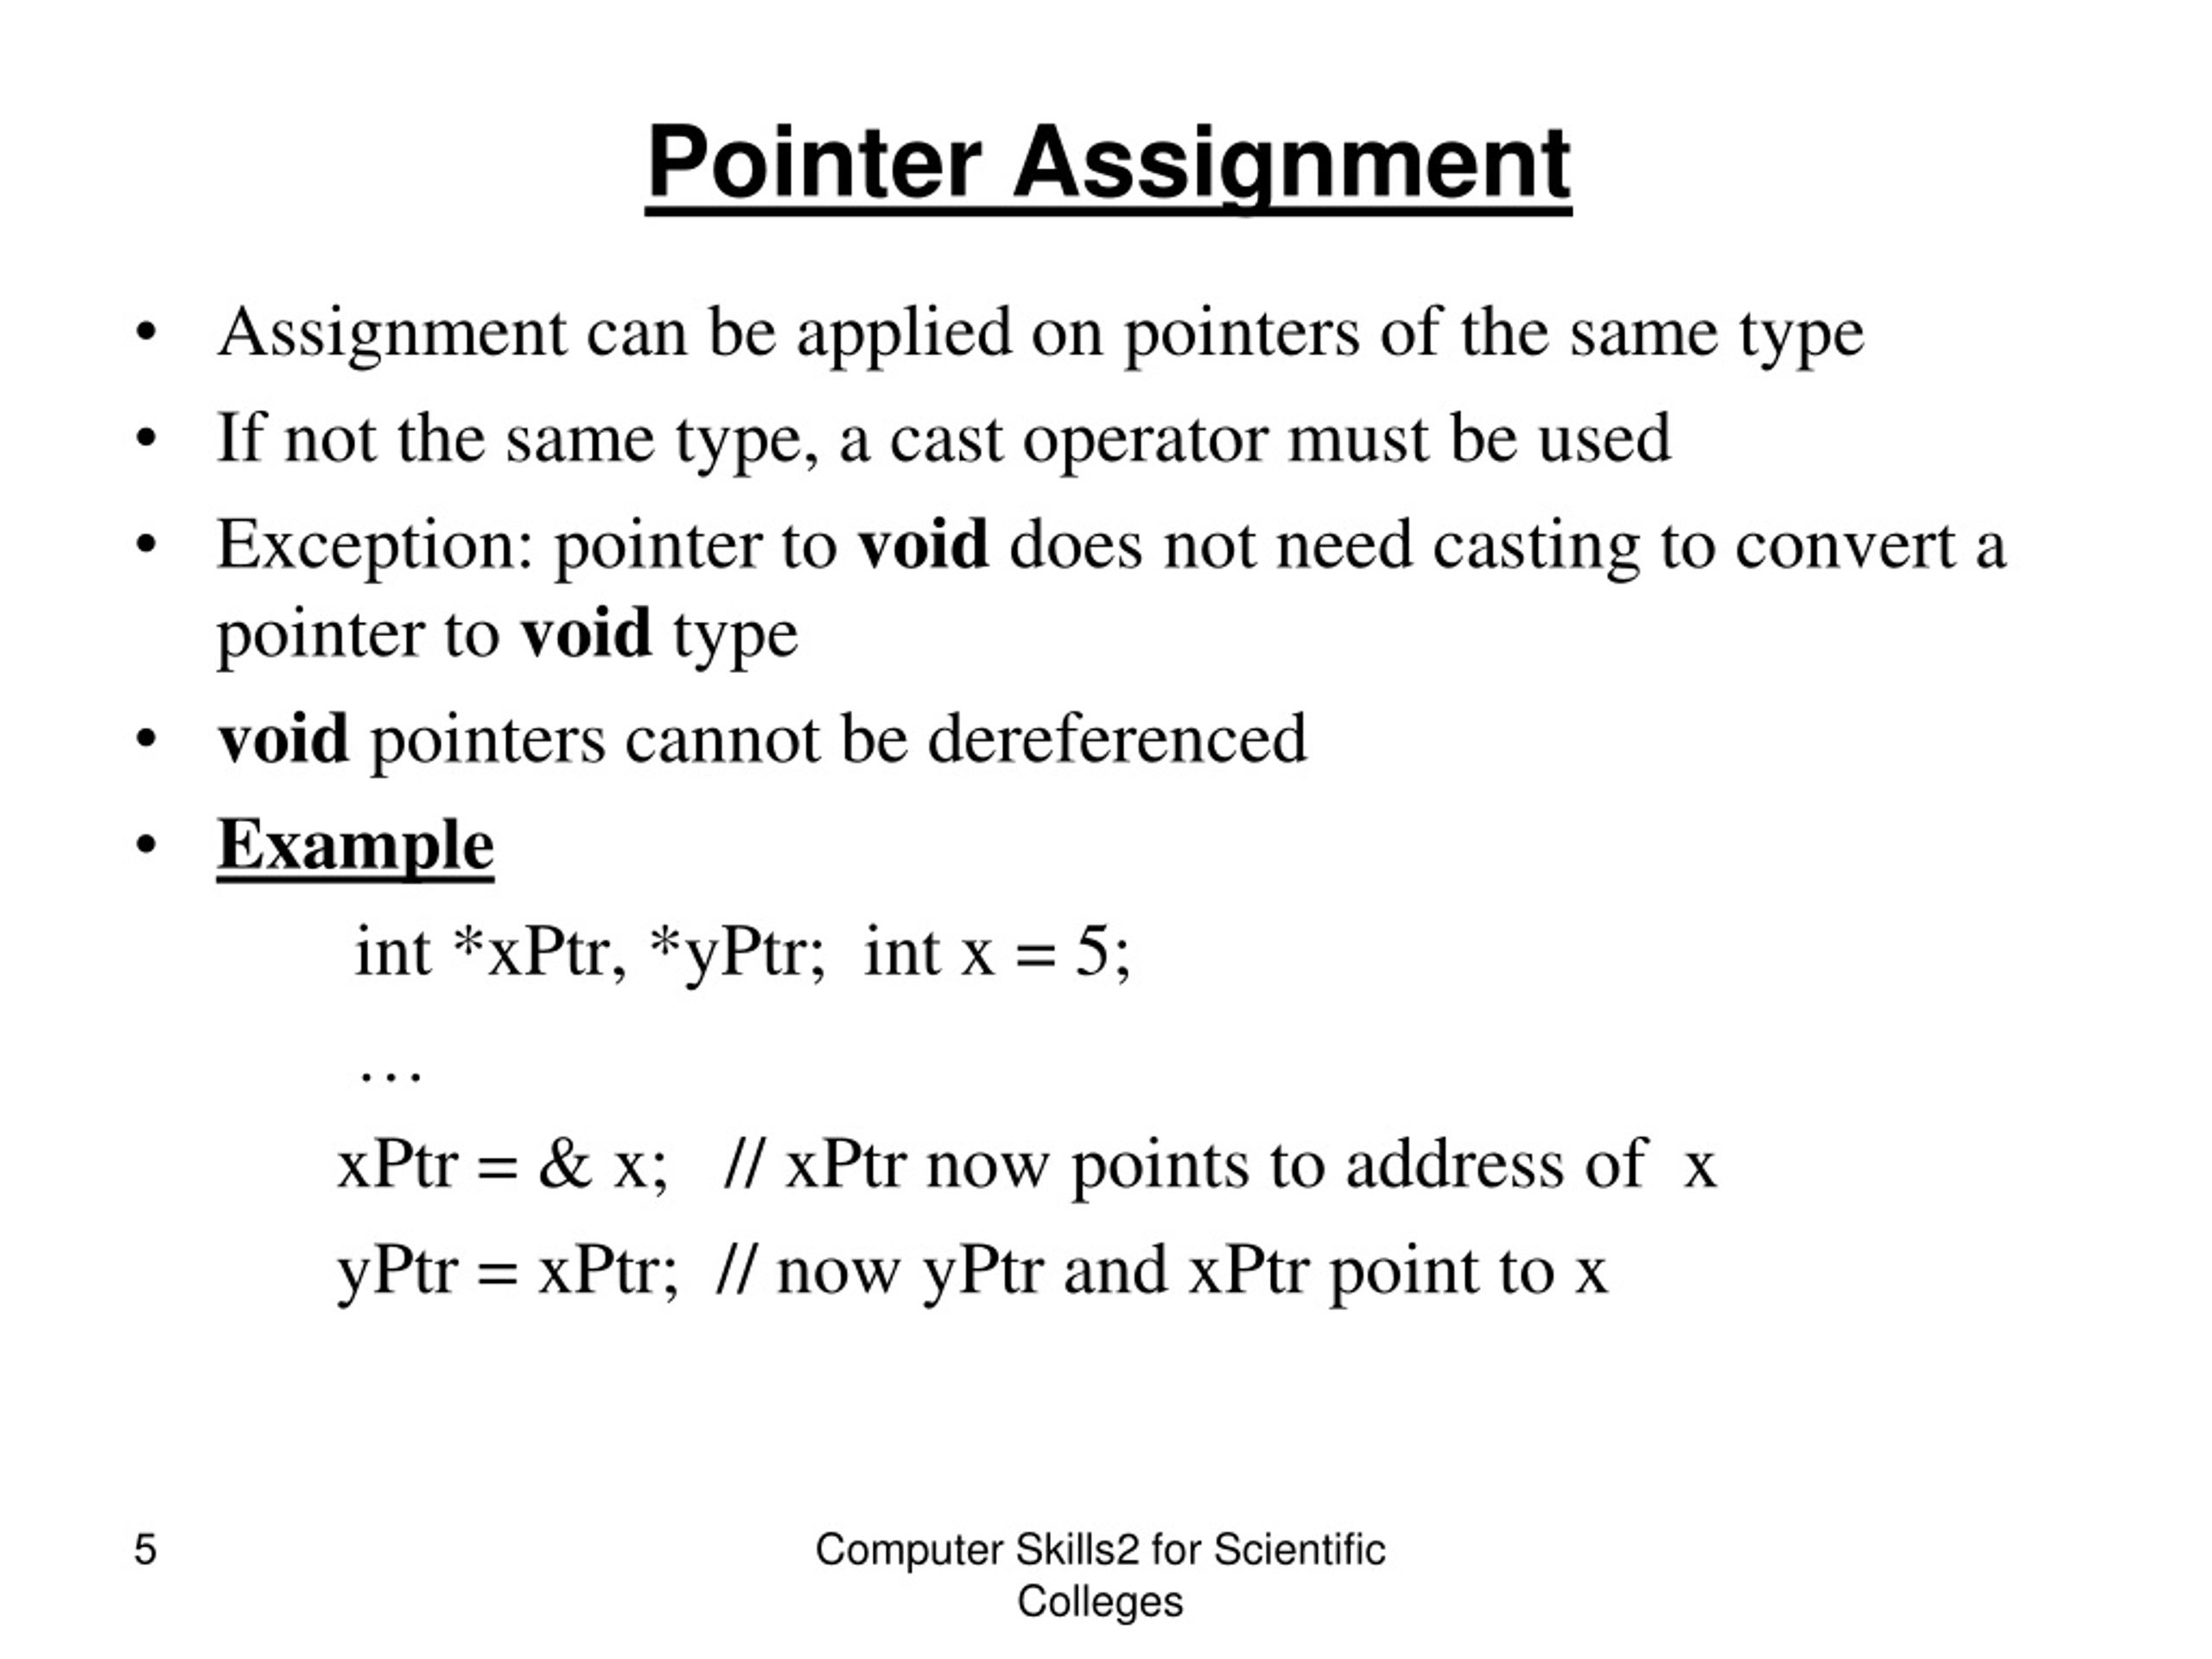 pointer targets in assignment differ in signedness